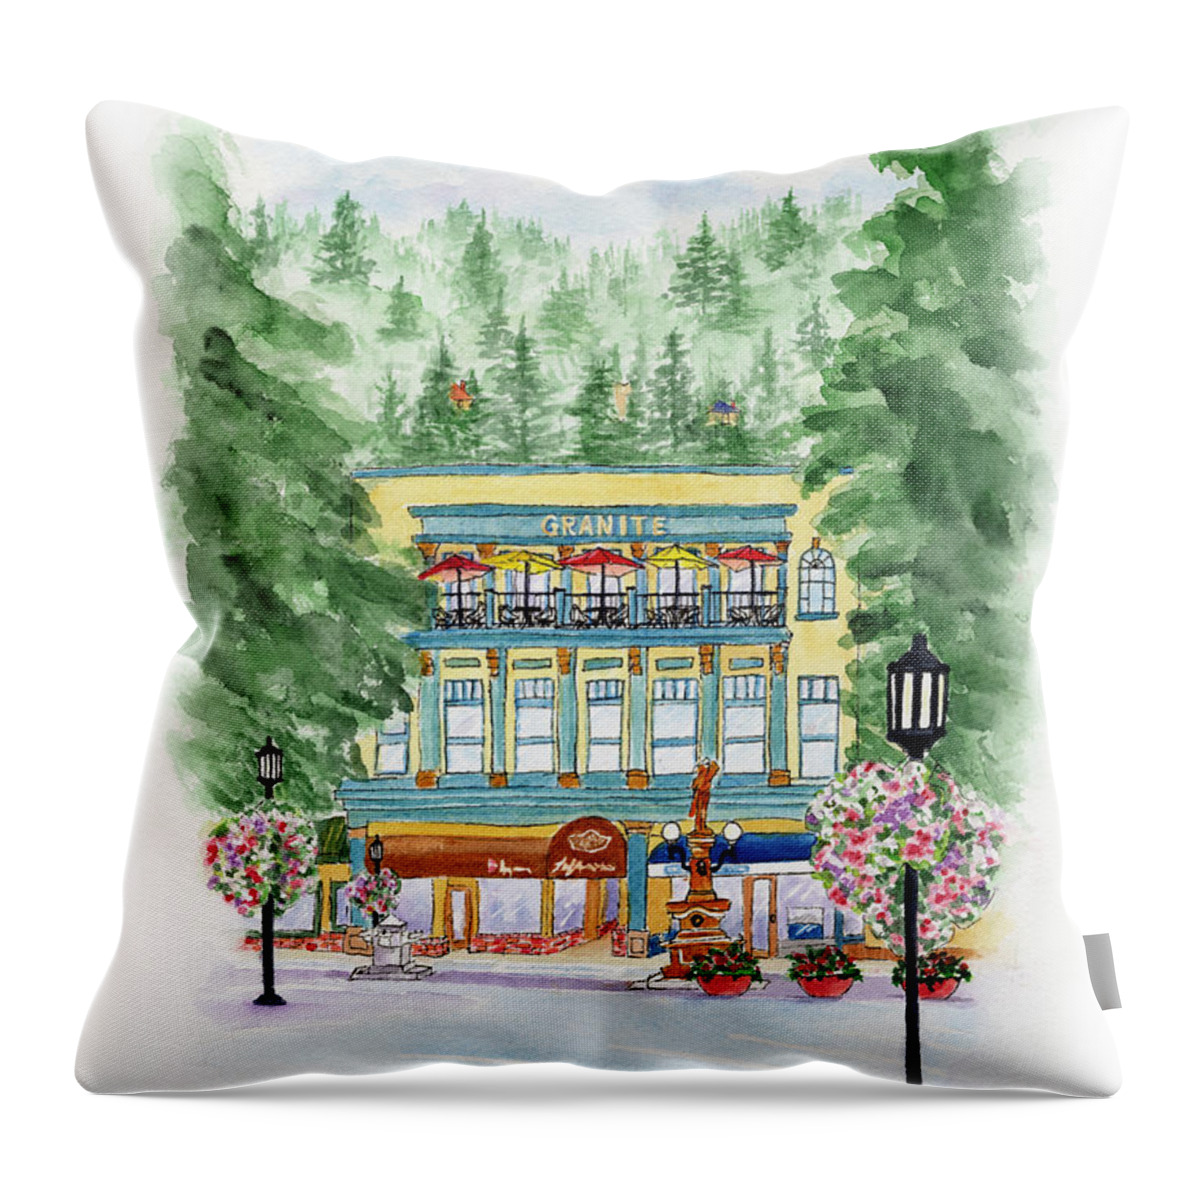 Granite Building Throw Pillow featuring the painting Granite on the Plaza by Lori Taylor